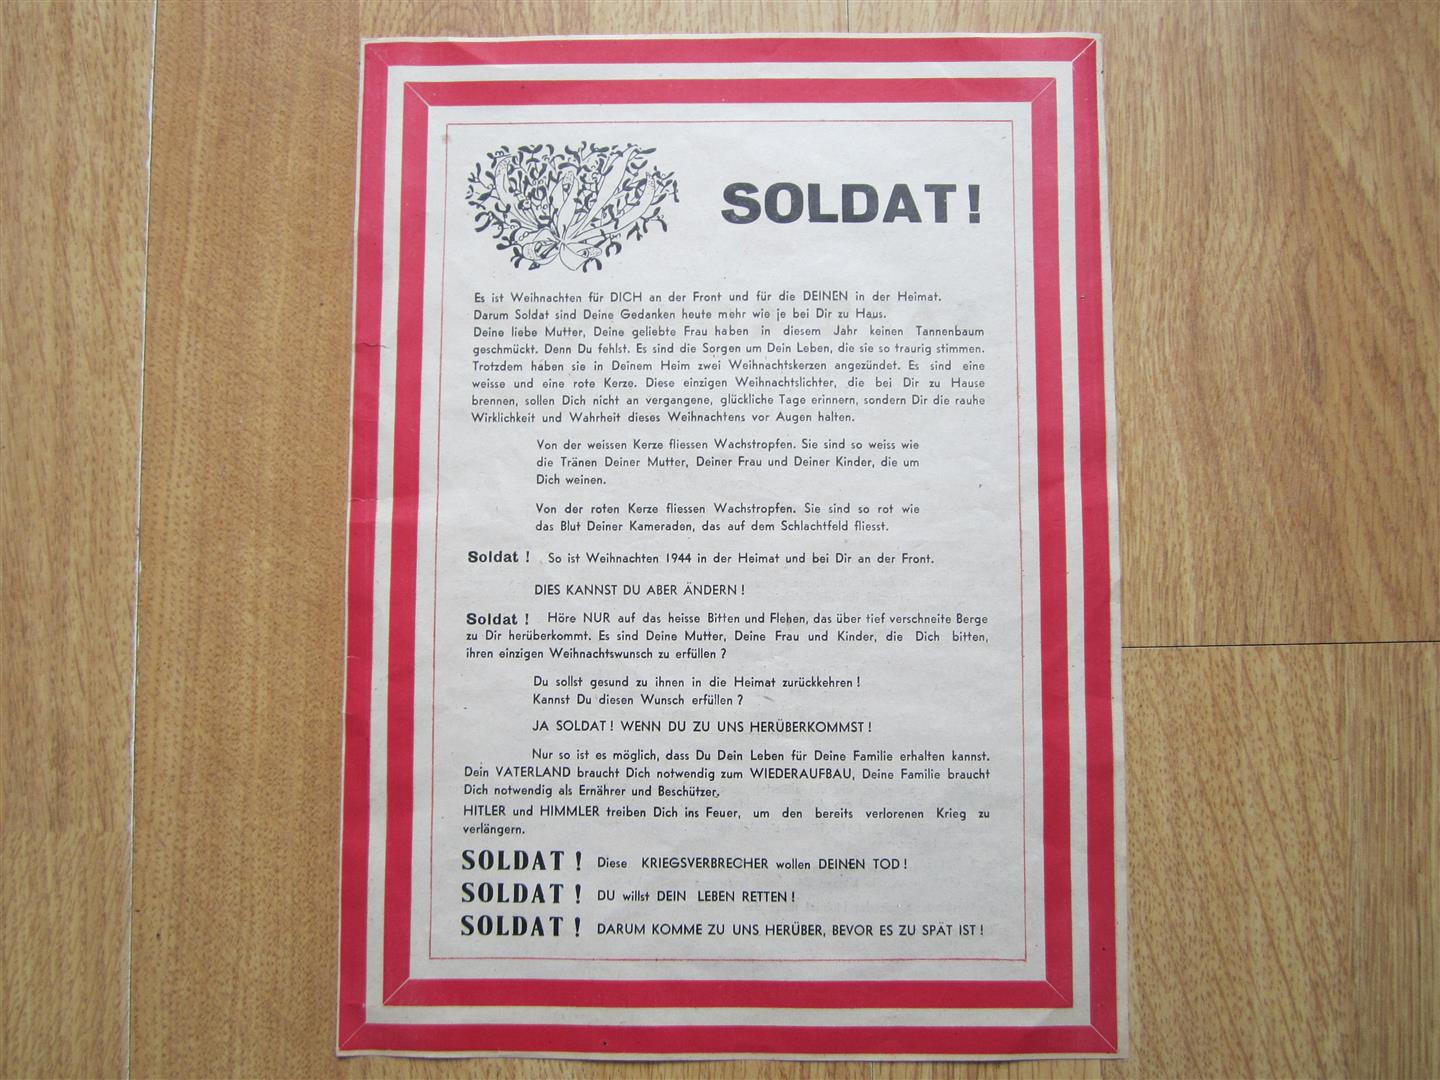 WW2 Allied Safe Conduct Pass